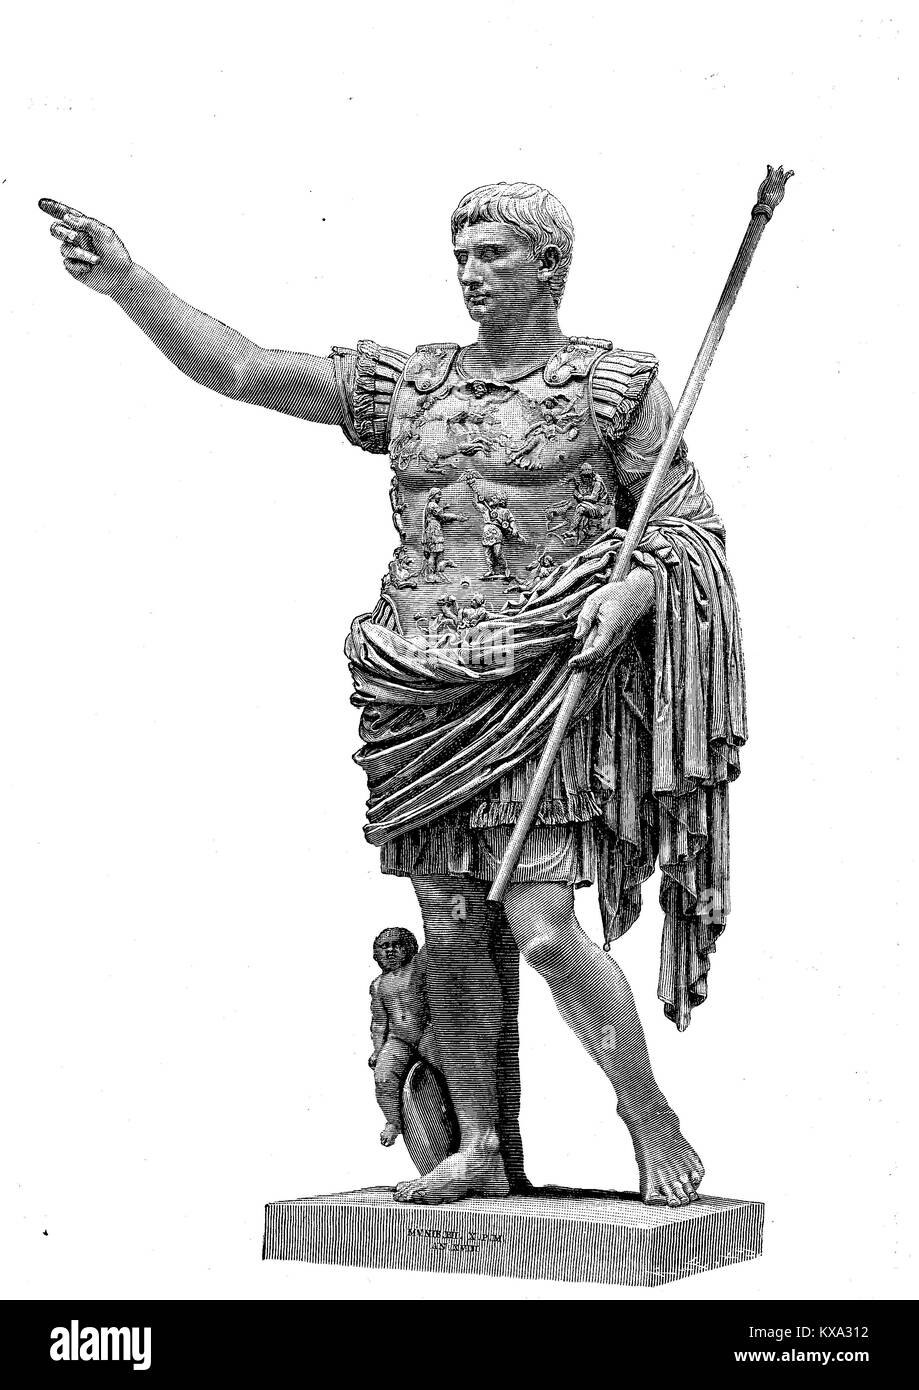 The statue of Augustus in the Vatican Museum of Rome, Italy, digital improved reproduction from an original woodcut or illustration from the year 1880 Stock Photo